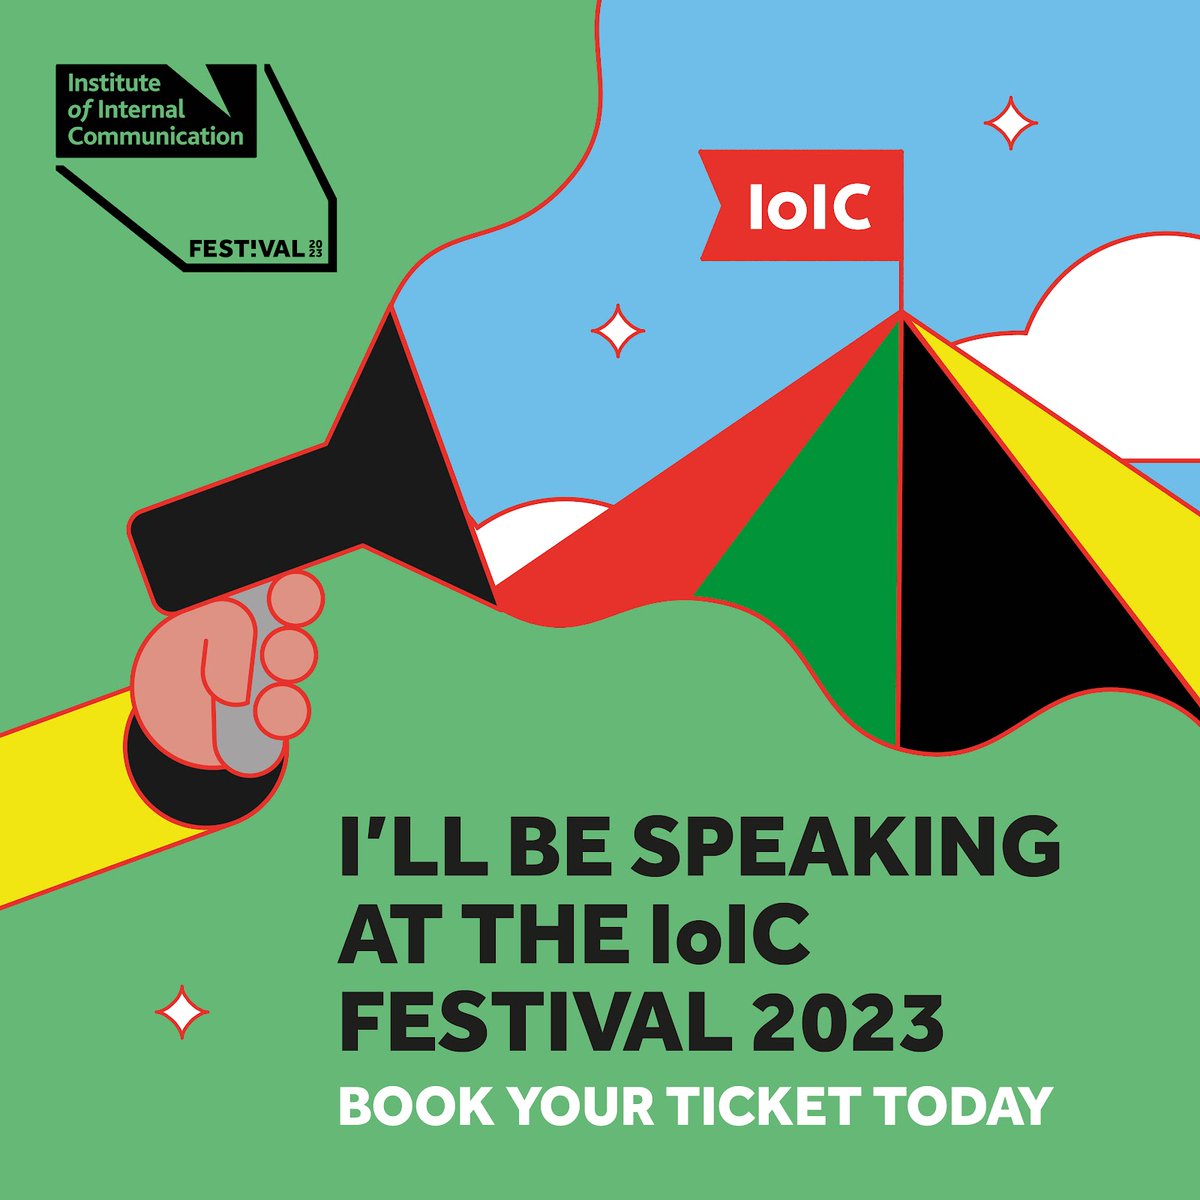 Excited to be speaking at #IoICFestival23 on June 15! Join me in the Practical Zone for 'How to Demonstrate and Develop Credibility' Let's explore effective conversations and showcase #credibility. Check out the full lineup & book your pass here: ioic.org.uk/.../ioic-festi… @IoICNews